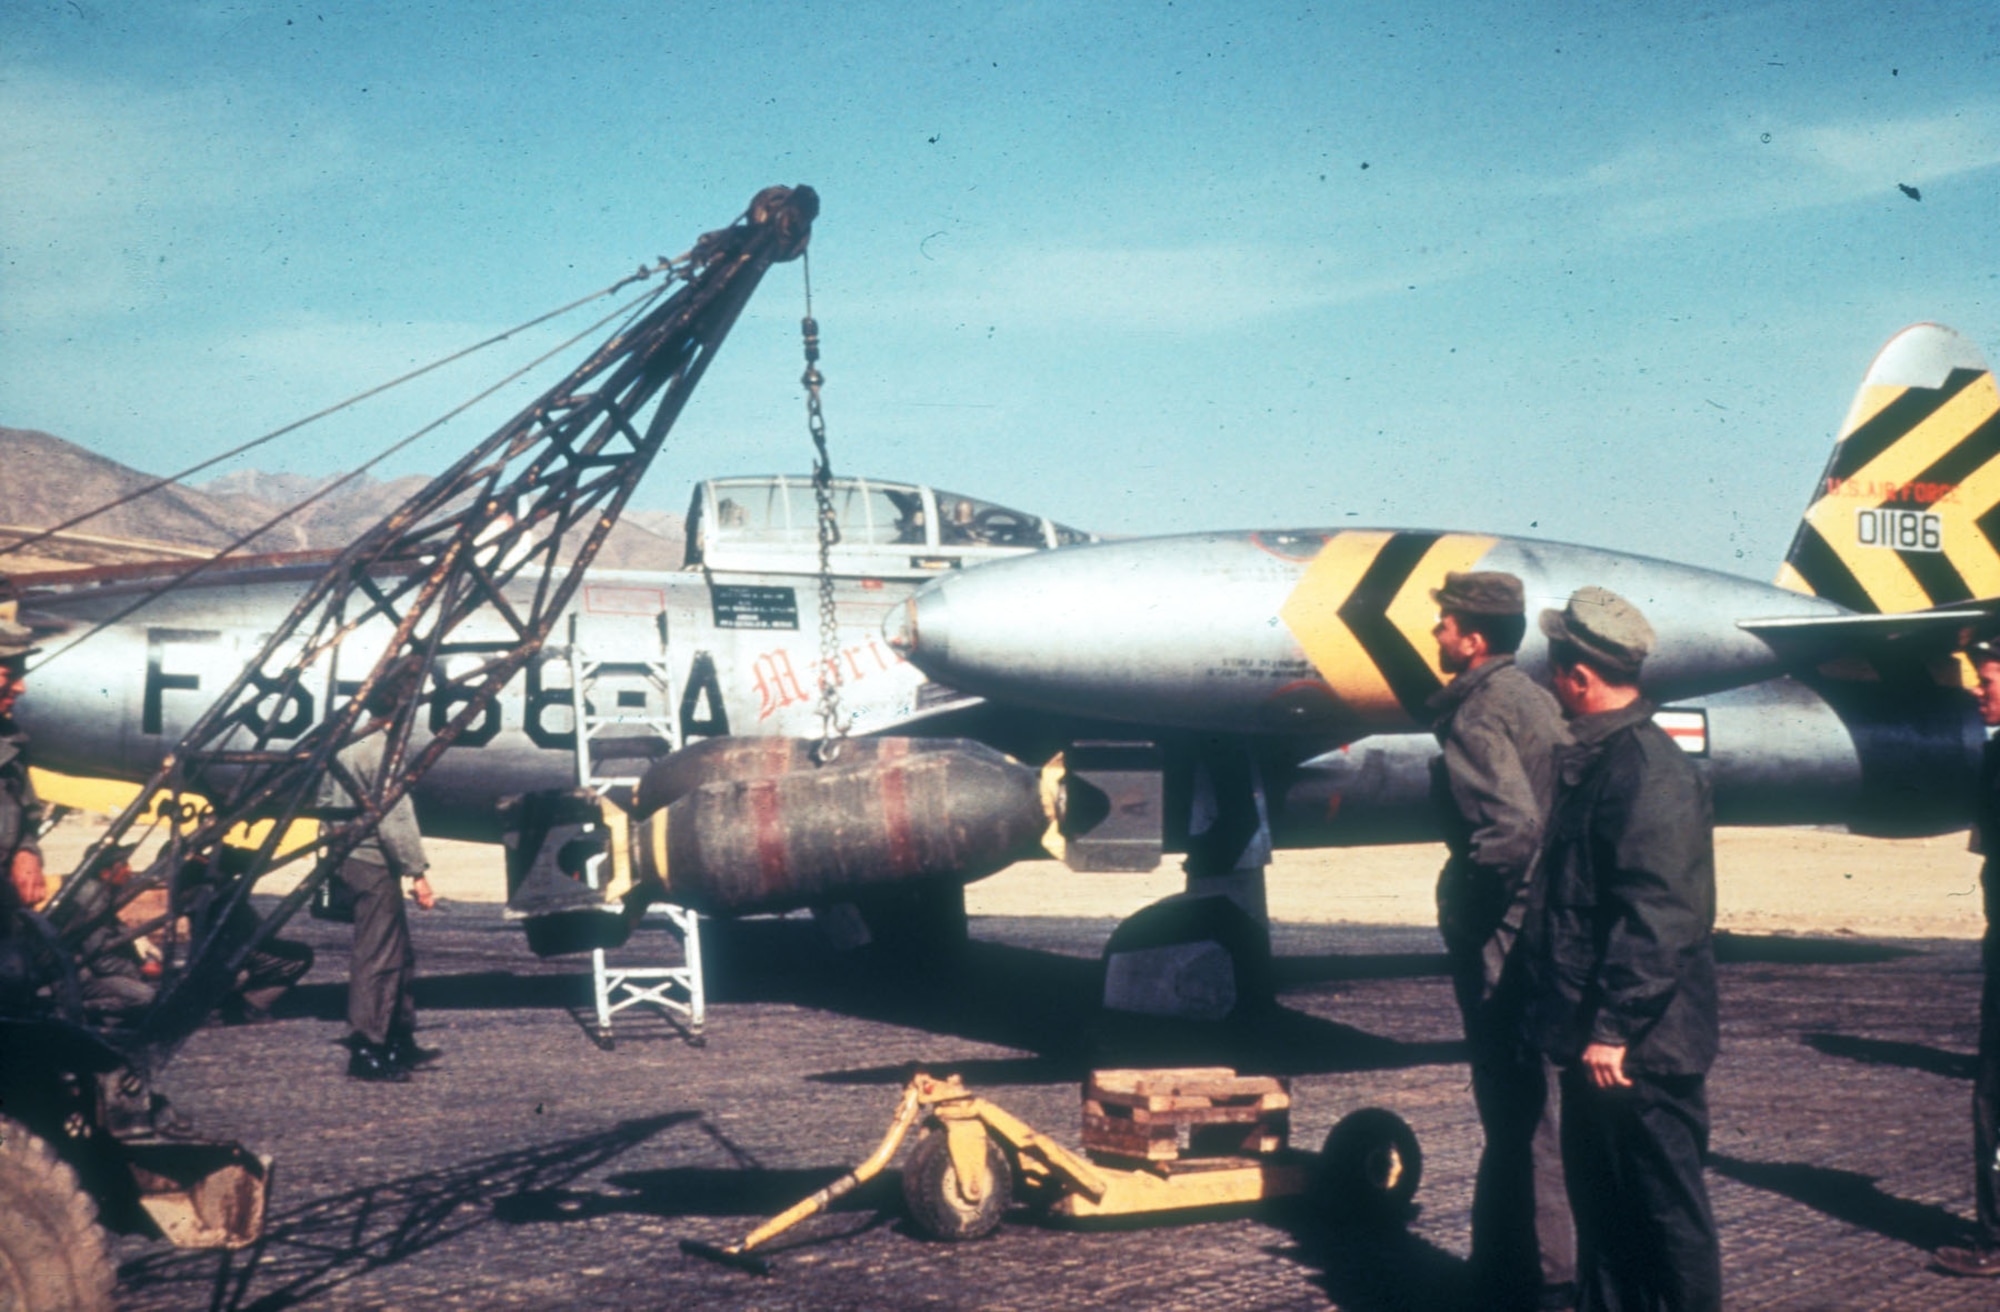 Although the F-84 "Thunderjet" was unable to protect USAF B-29s from the MiG-15, it proved to be an excellent ground attack aircraft. The F-84 carried a heavy bomb load and contributed to the “air pressure” campaign against strategic targets. (U.S. Air Force photo)